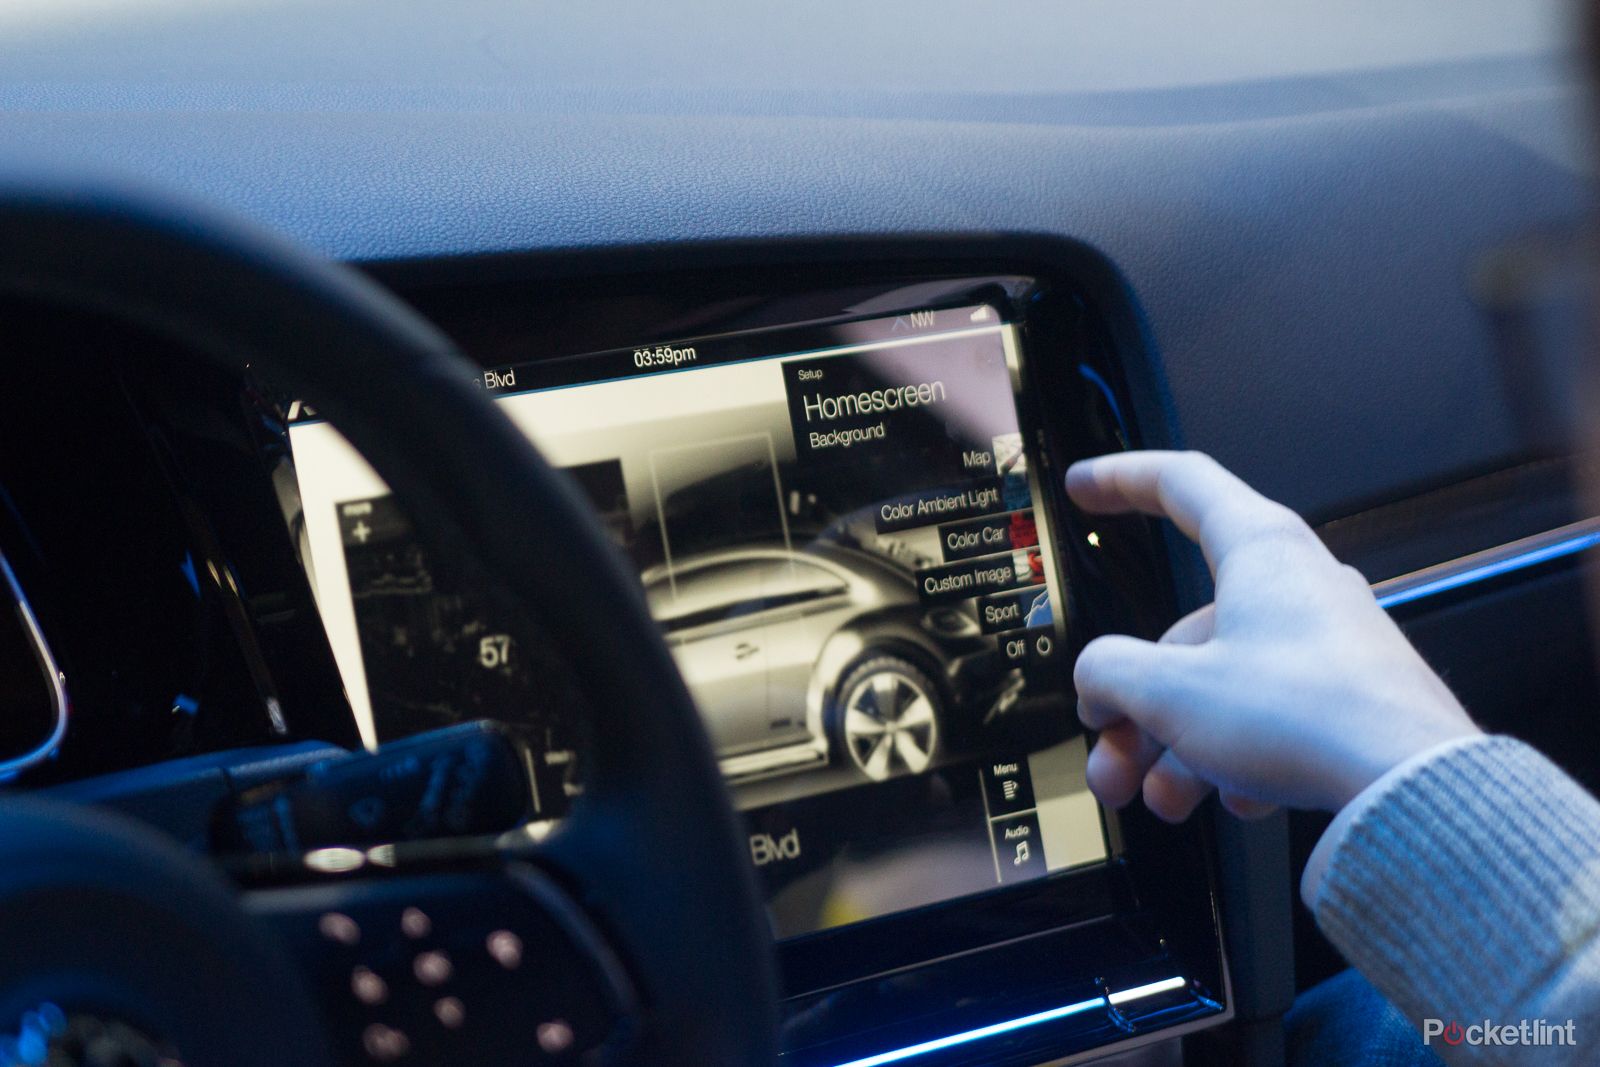 vw golf r touch hands on forget knobs vw sees gestures and touchscreen as the future image 7